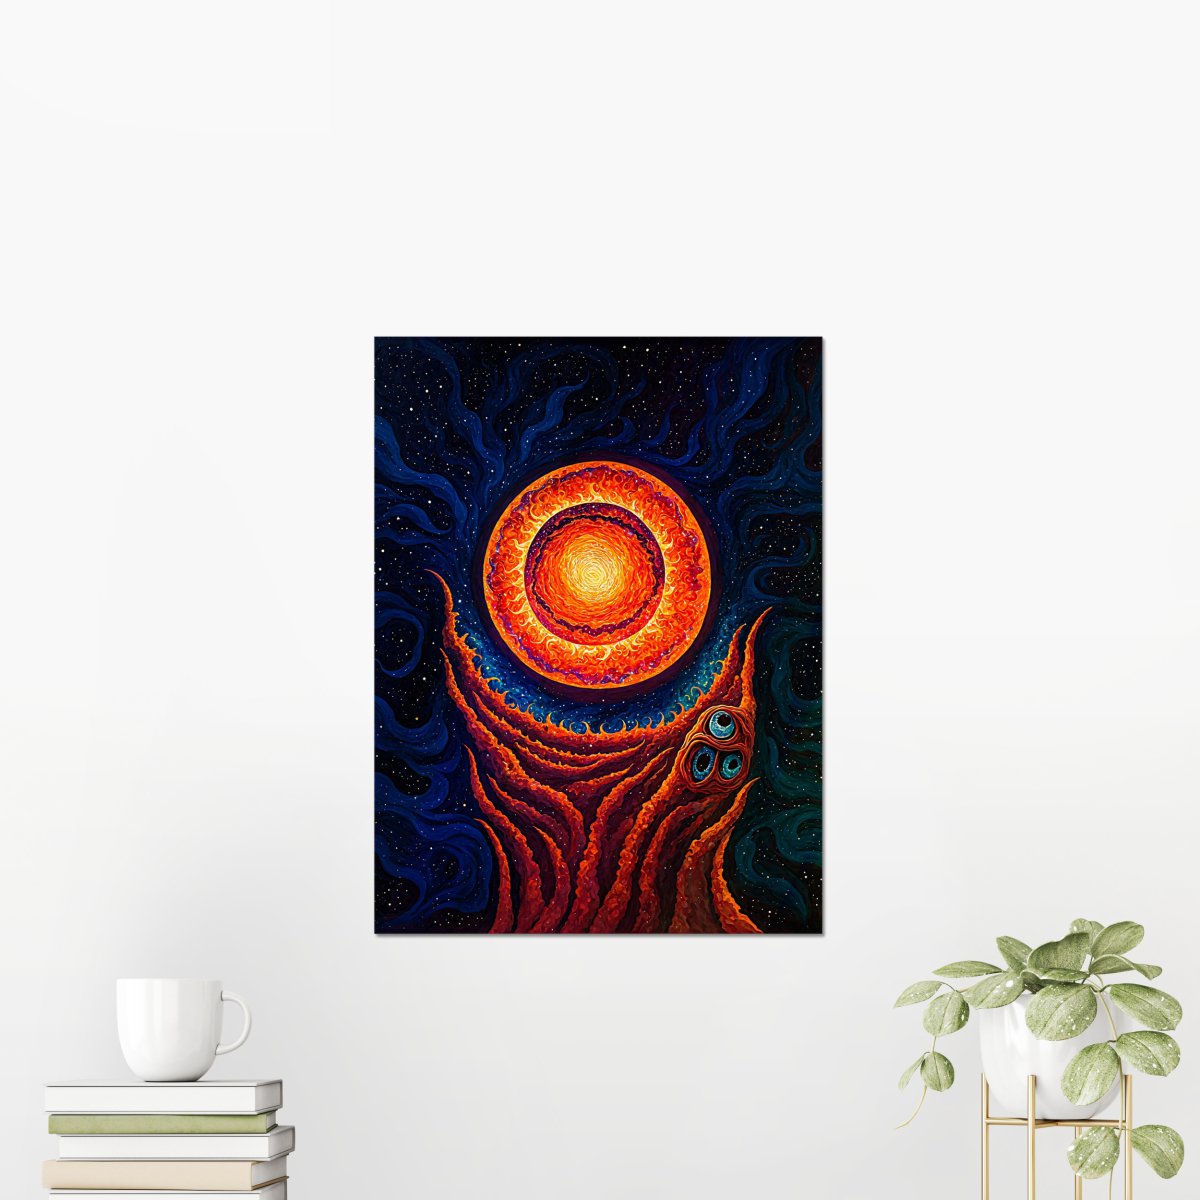 World eater - Art print - Poster - Ever colorful